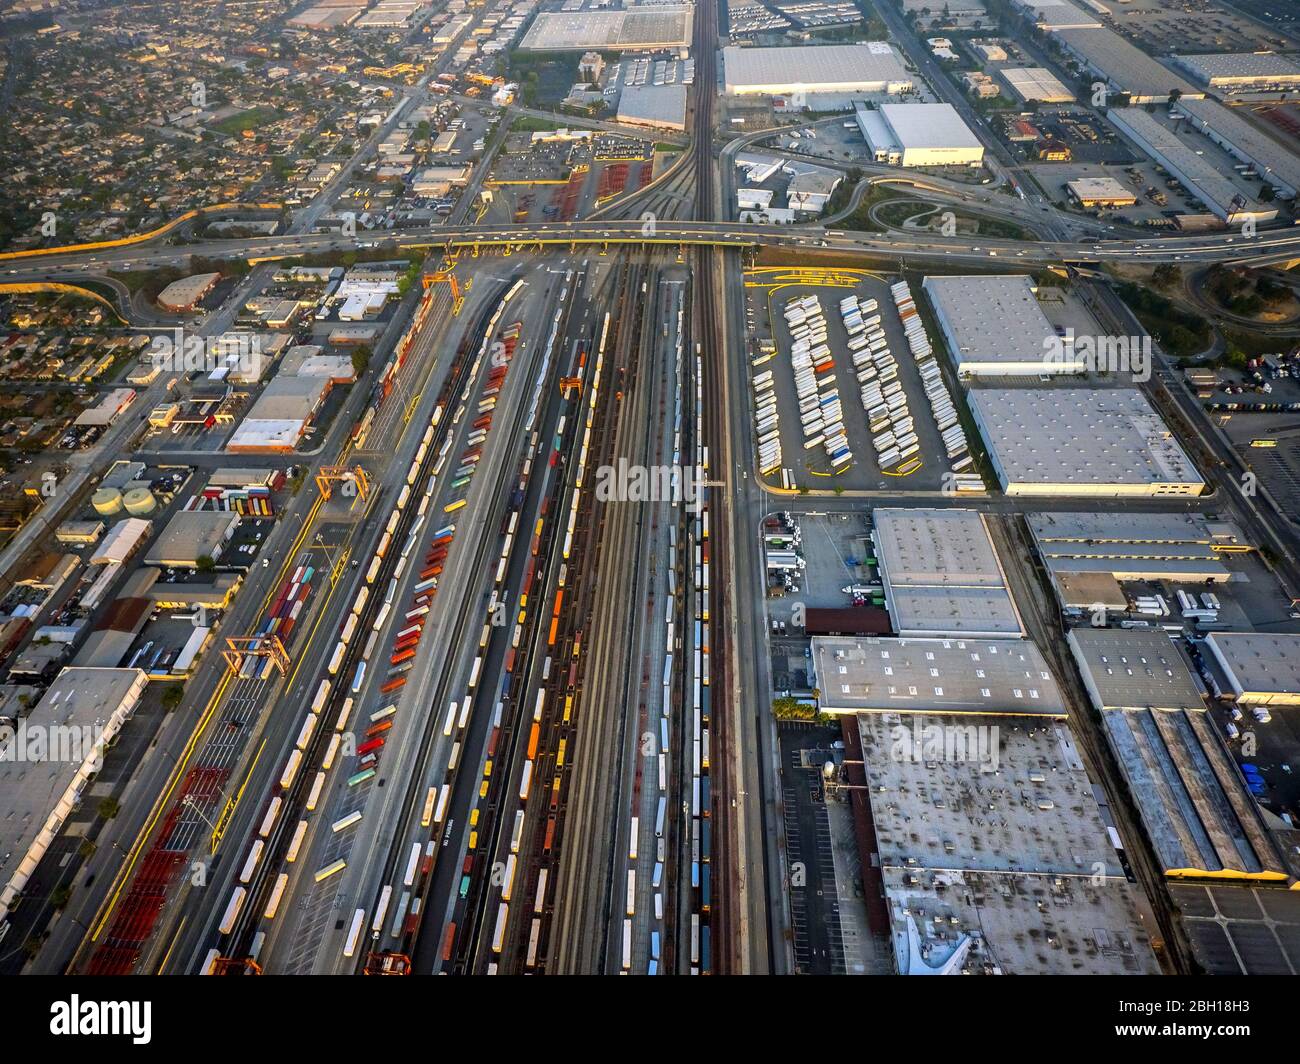 , Marshalling yard and freight station in an industrial area along Bandini Blvd in Vernon, 20.03.2016, aerial view, USA, California, Vernon Stock Photo